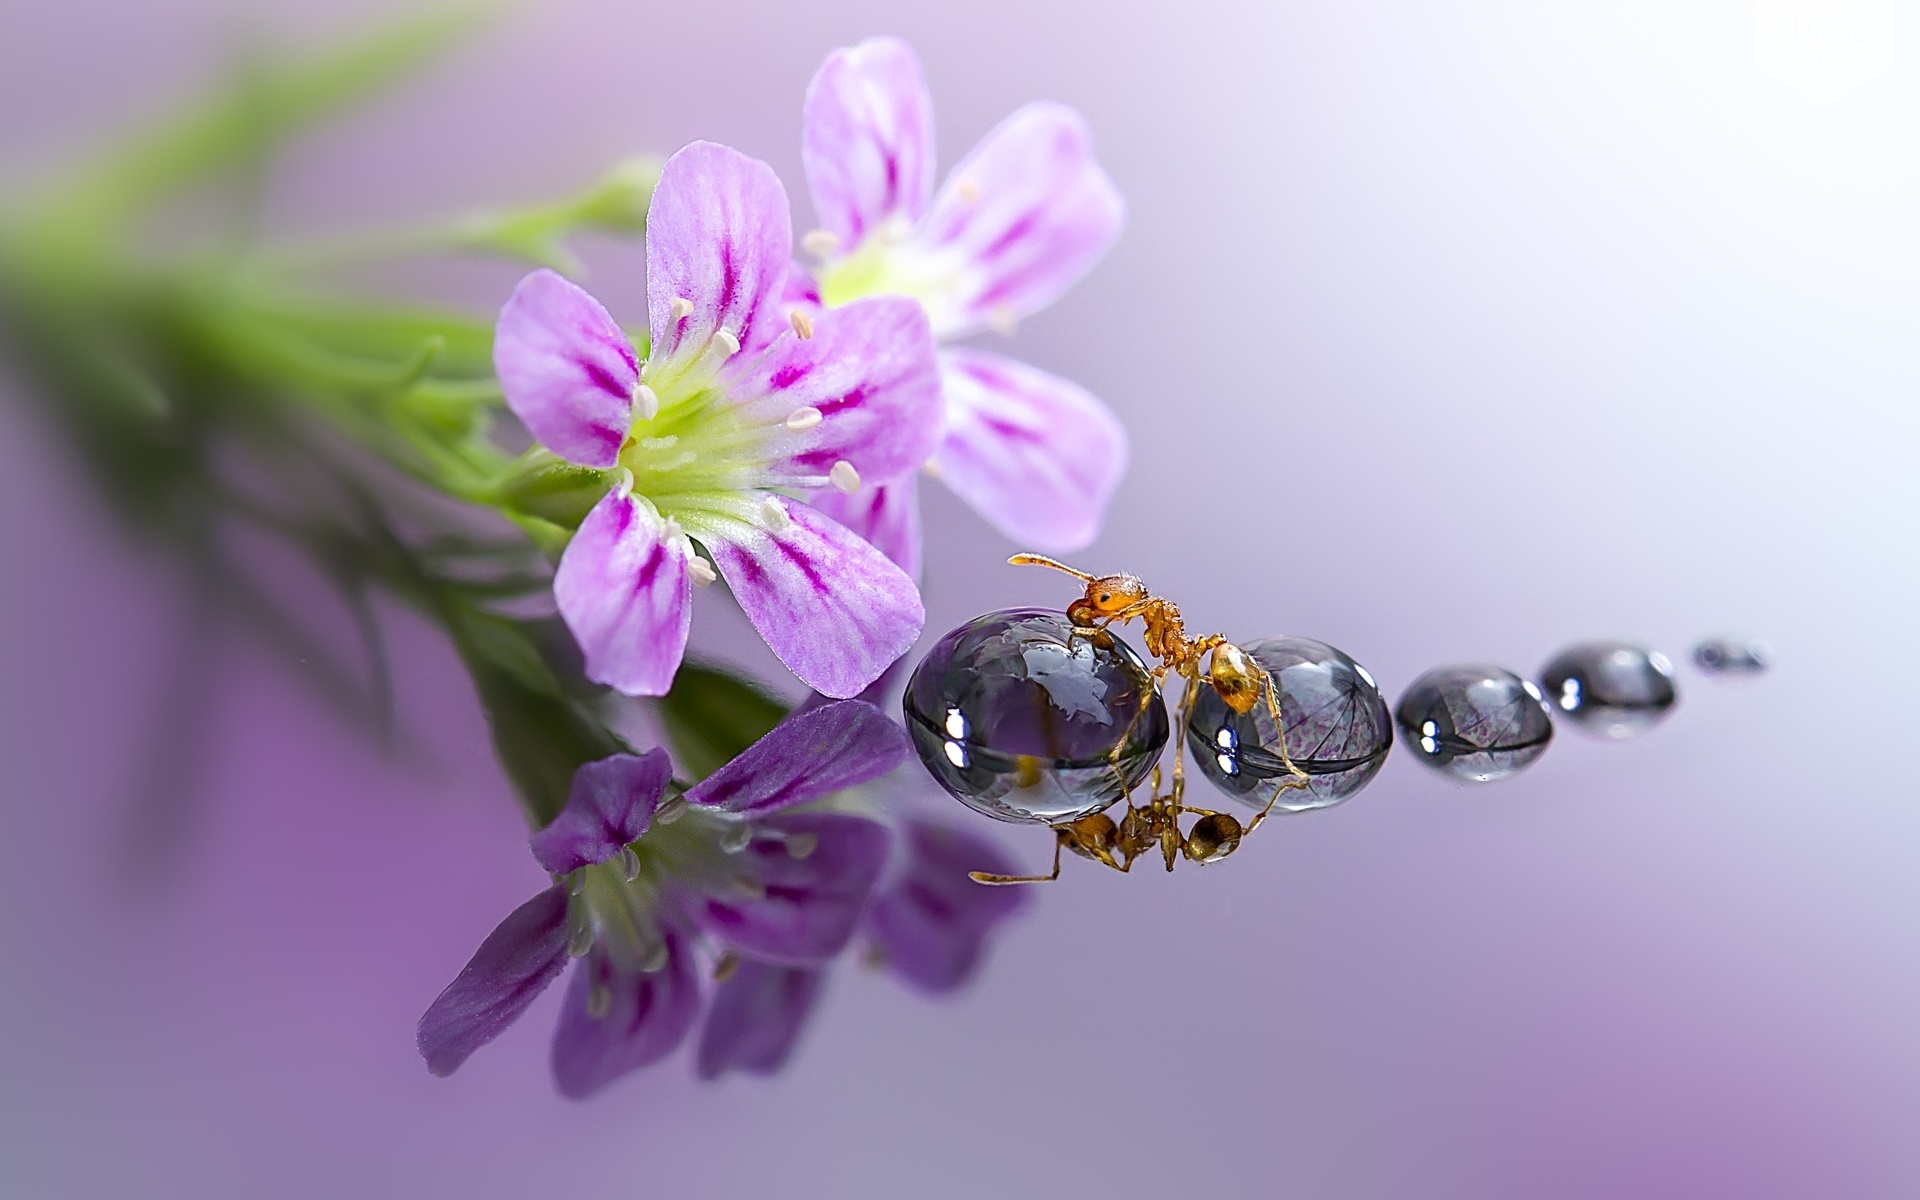 Image: Ant, flower, reflection, drops